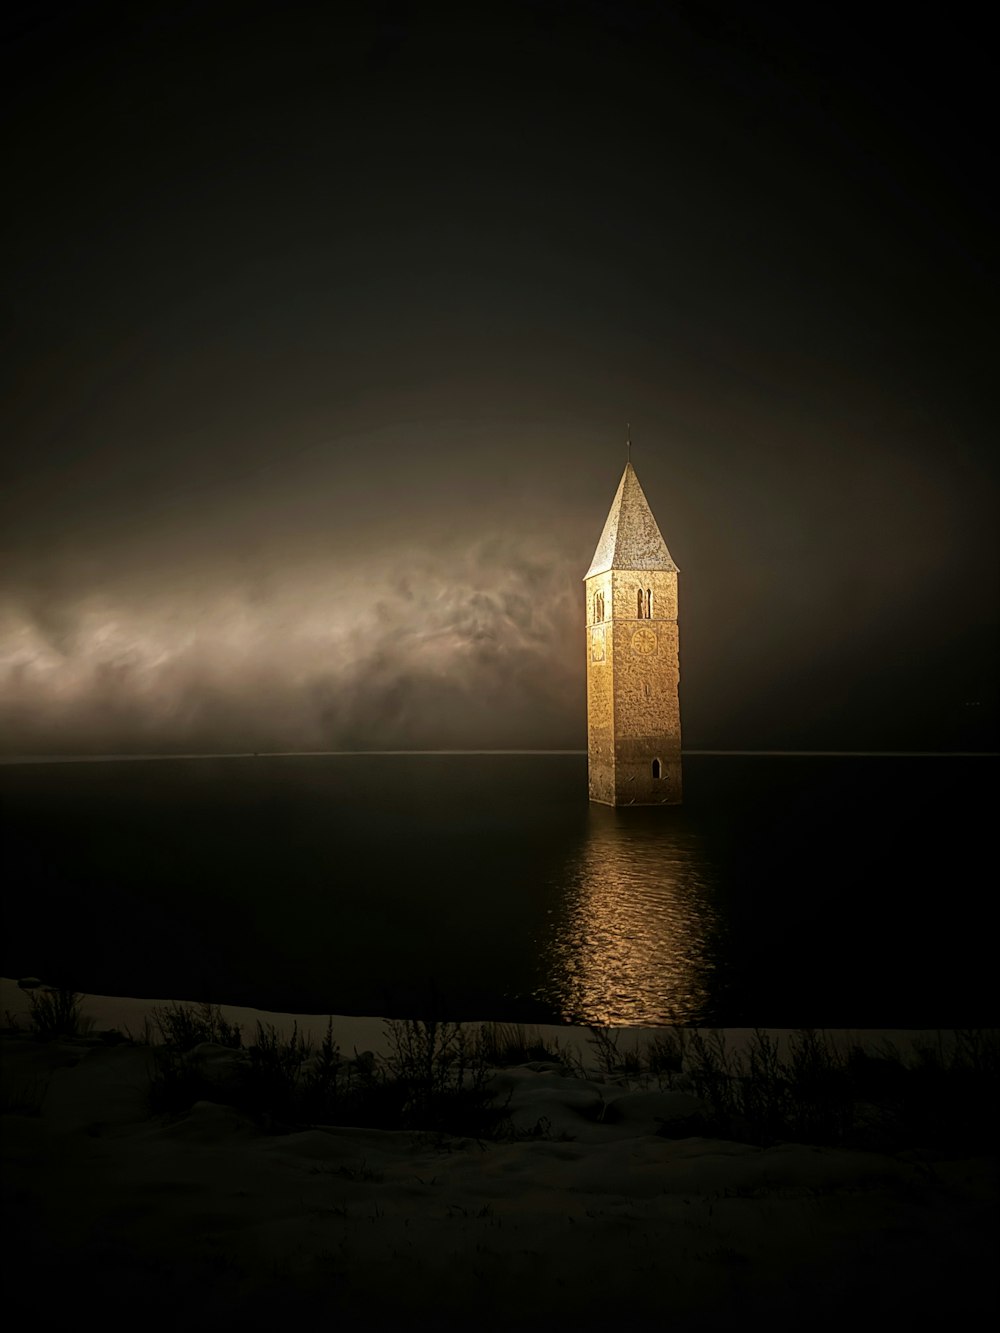 a clock tower sitting in the middle of a body of water